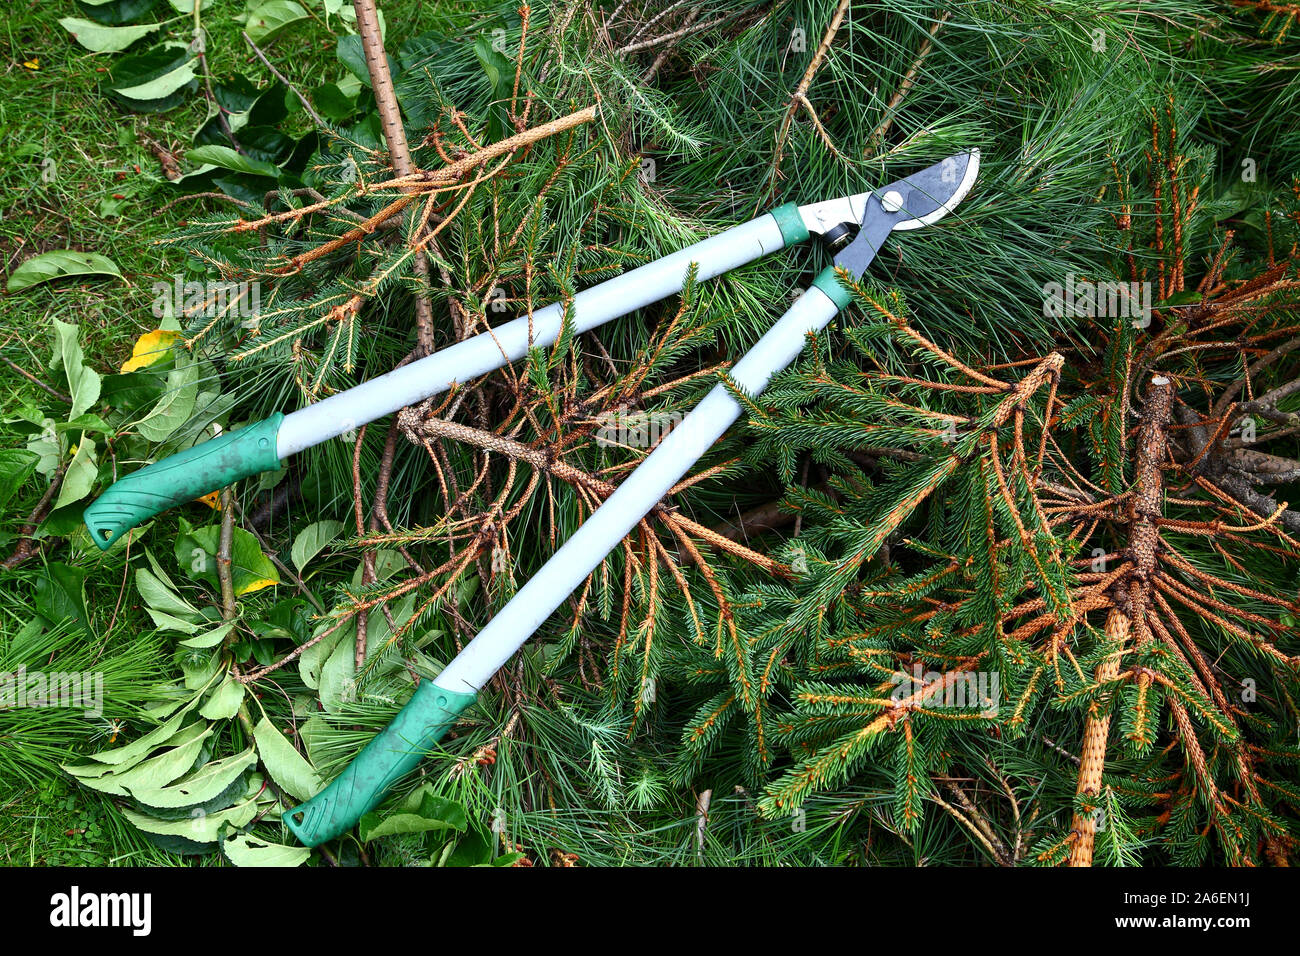 Garden loppers  on a heap of fir tree branches Stock Photo